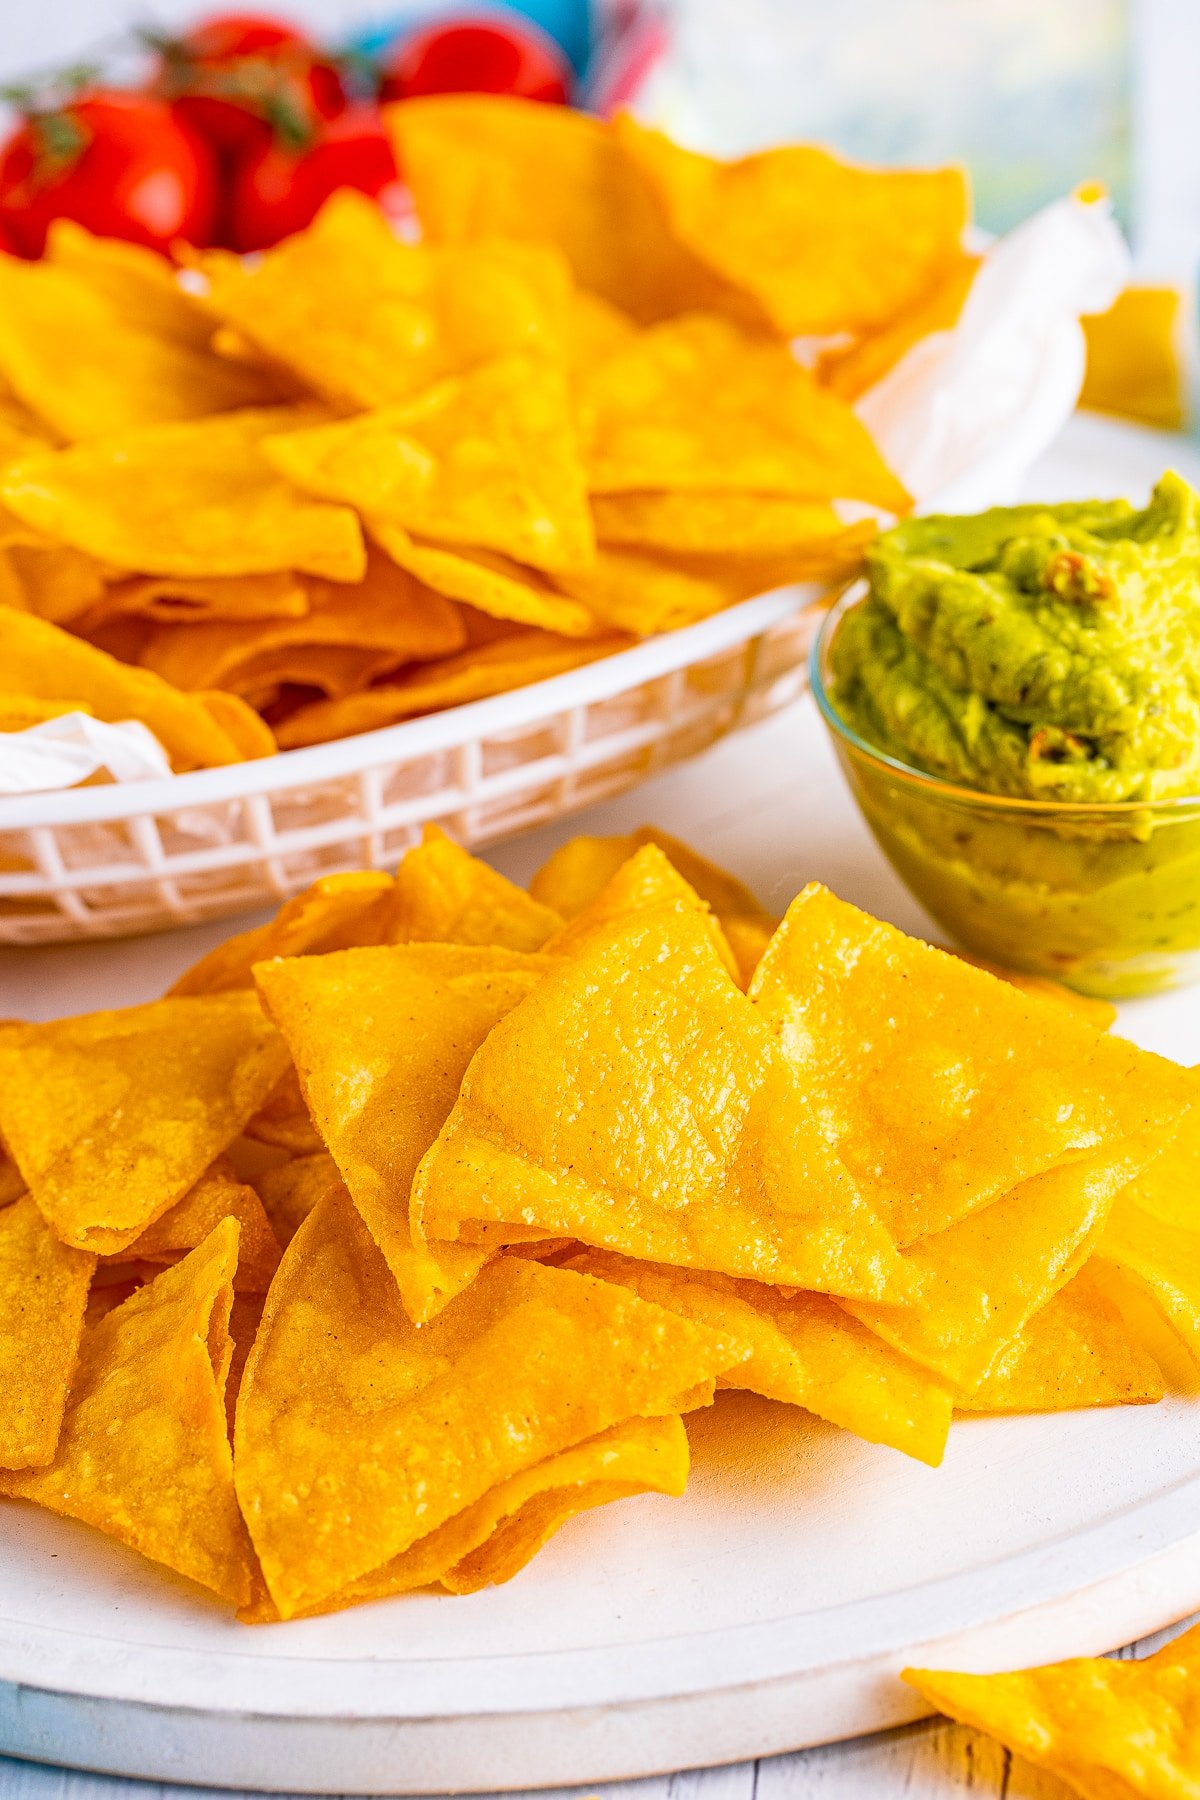 Upclose image of homemade fried tortilla chips on a white serving platter with guacamole